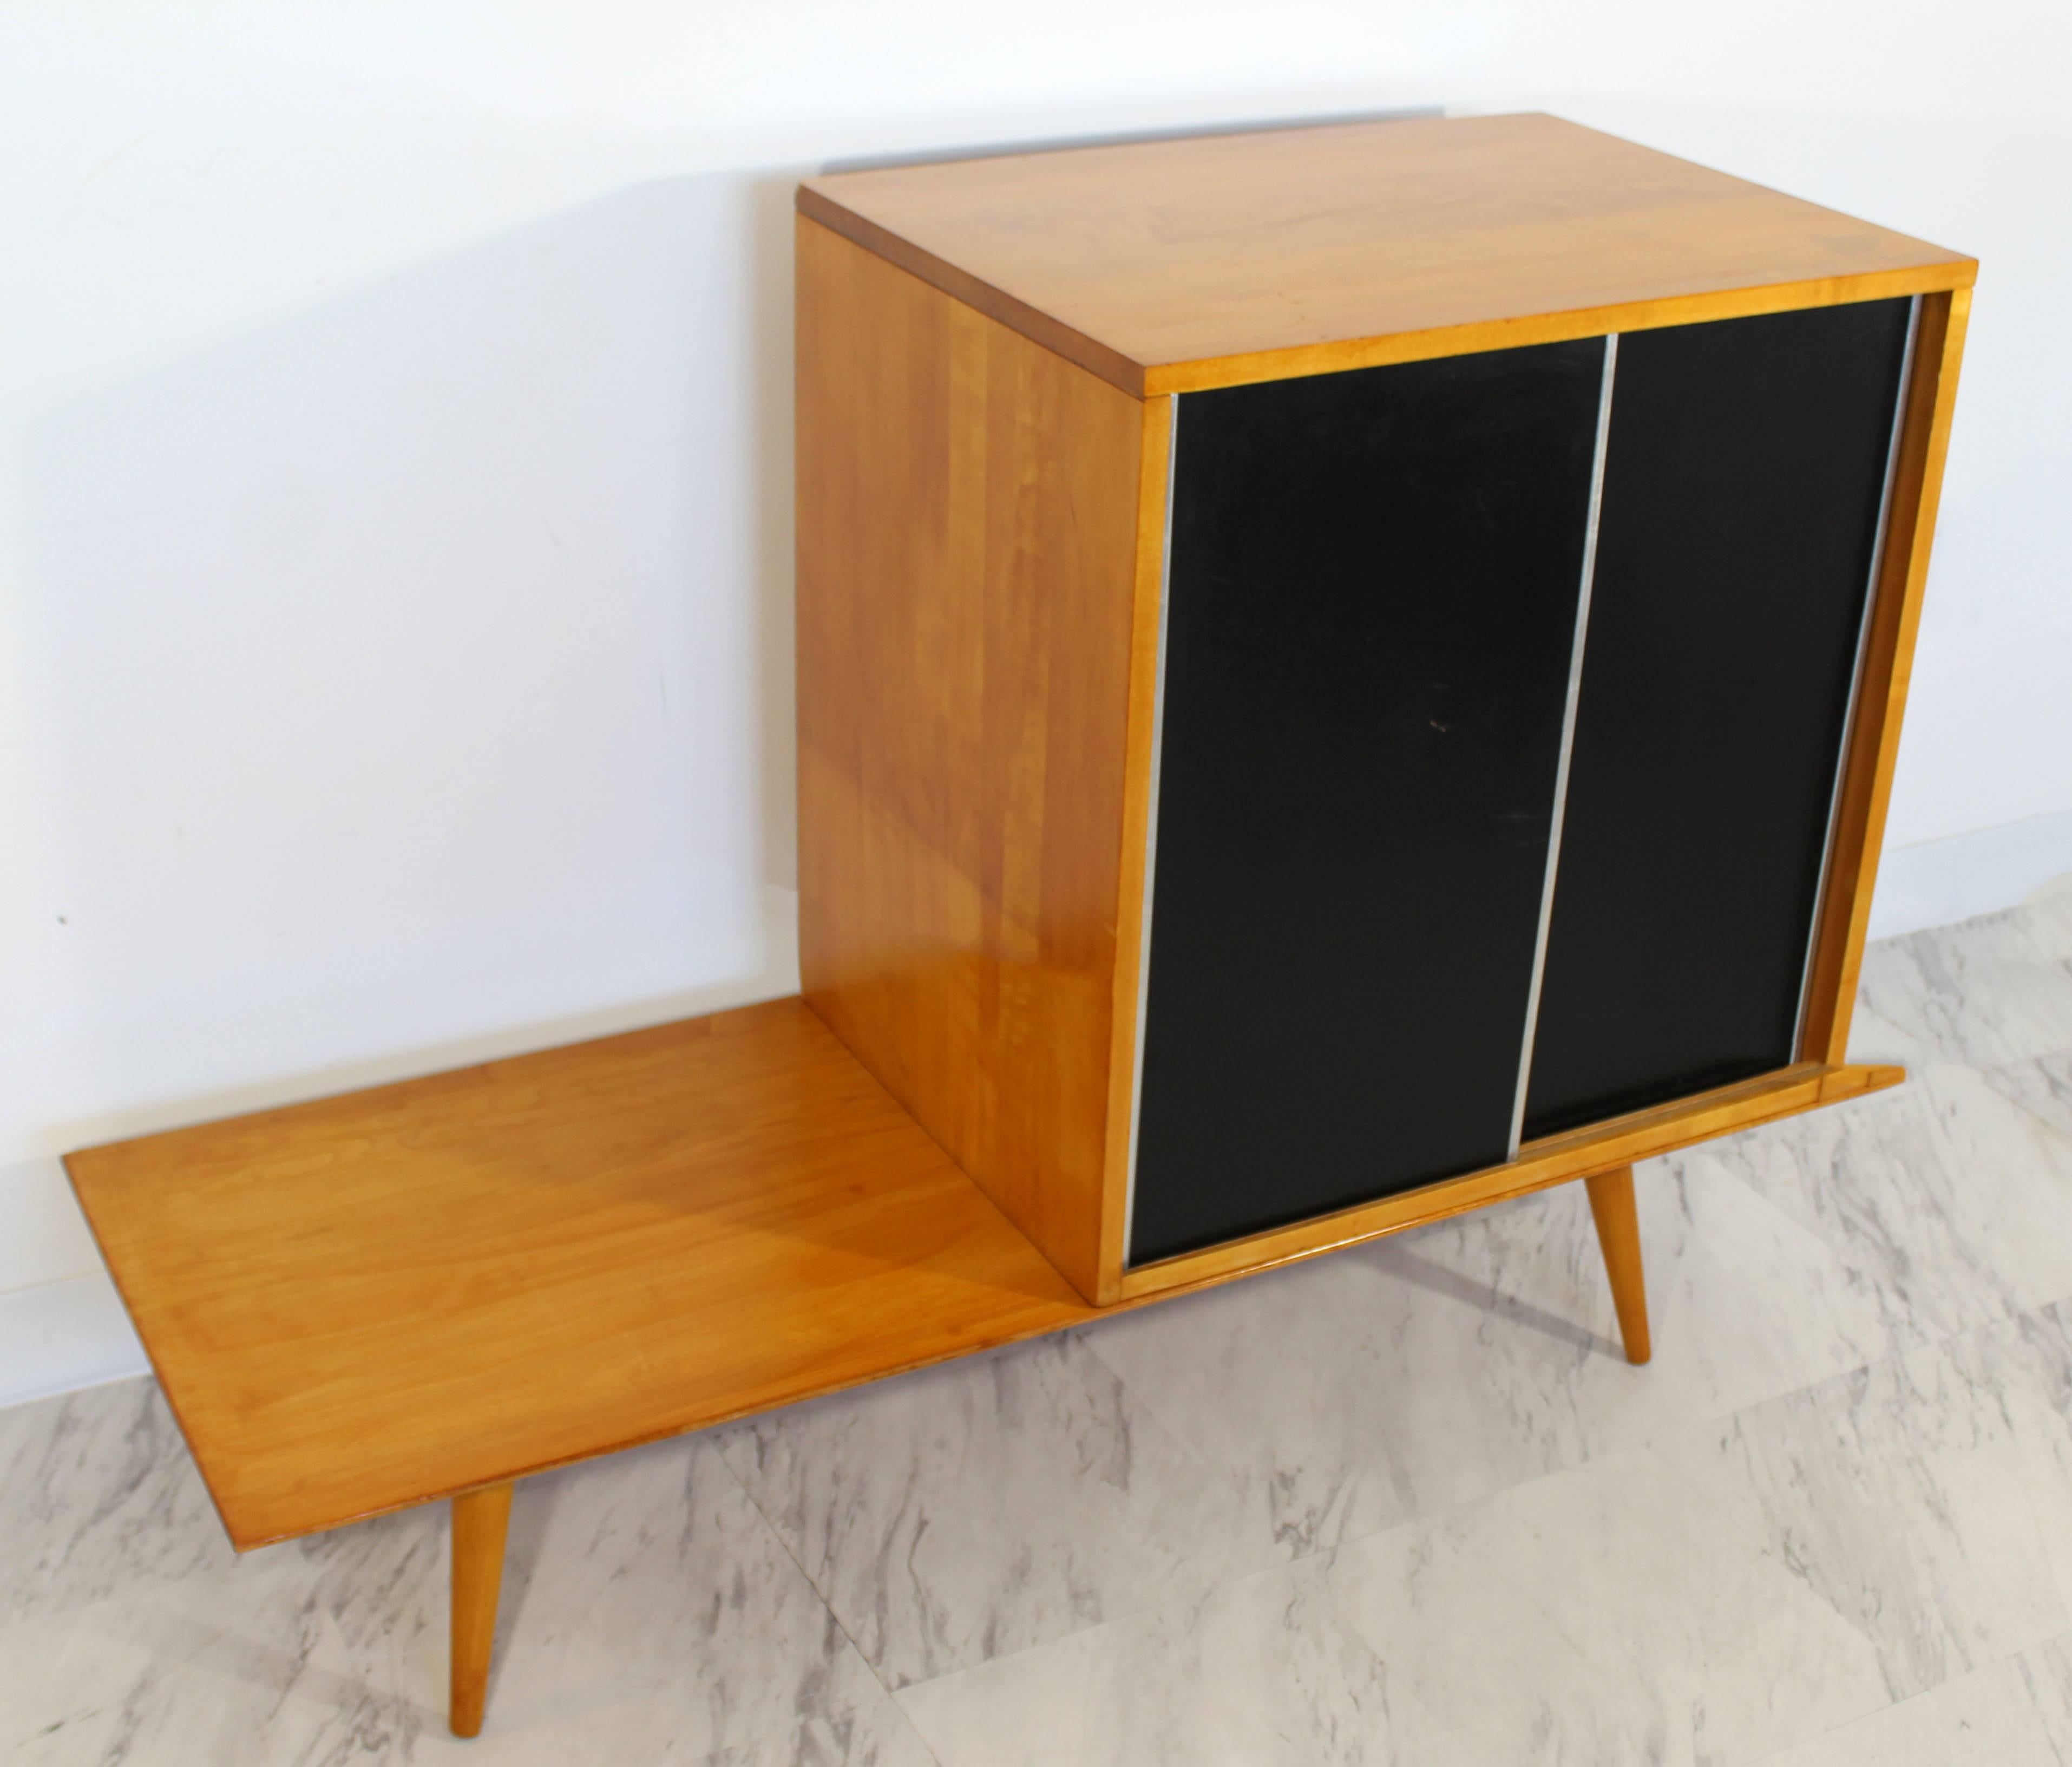 For your consideration is an incredible, coffee table or bench and cabinet with sliding doors, made of solid maple and with tapered legs, by Paul McCobb for Winchendon, circa the 1960s. In excellent condition. The dimensions of the table are 48